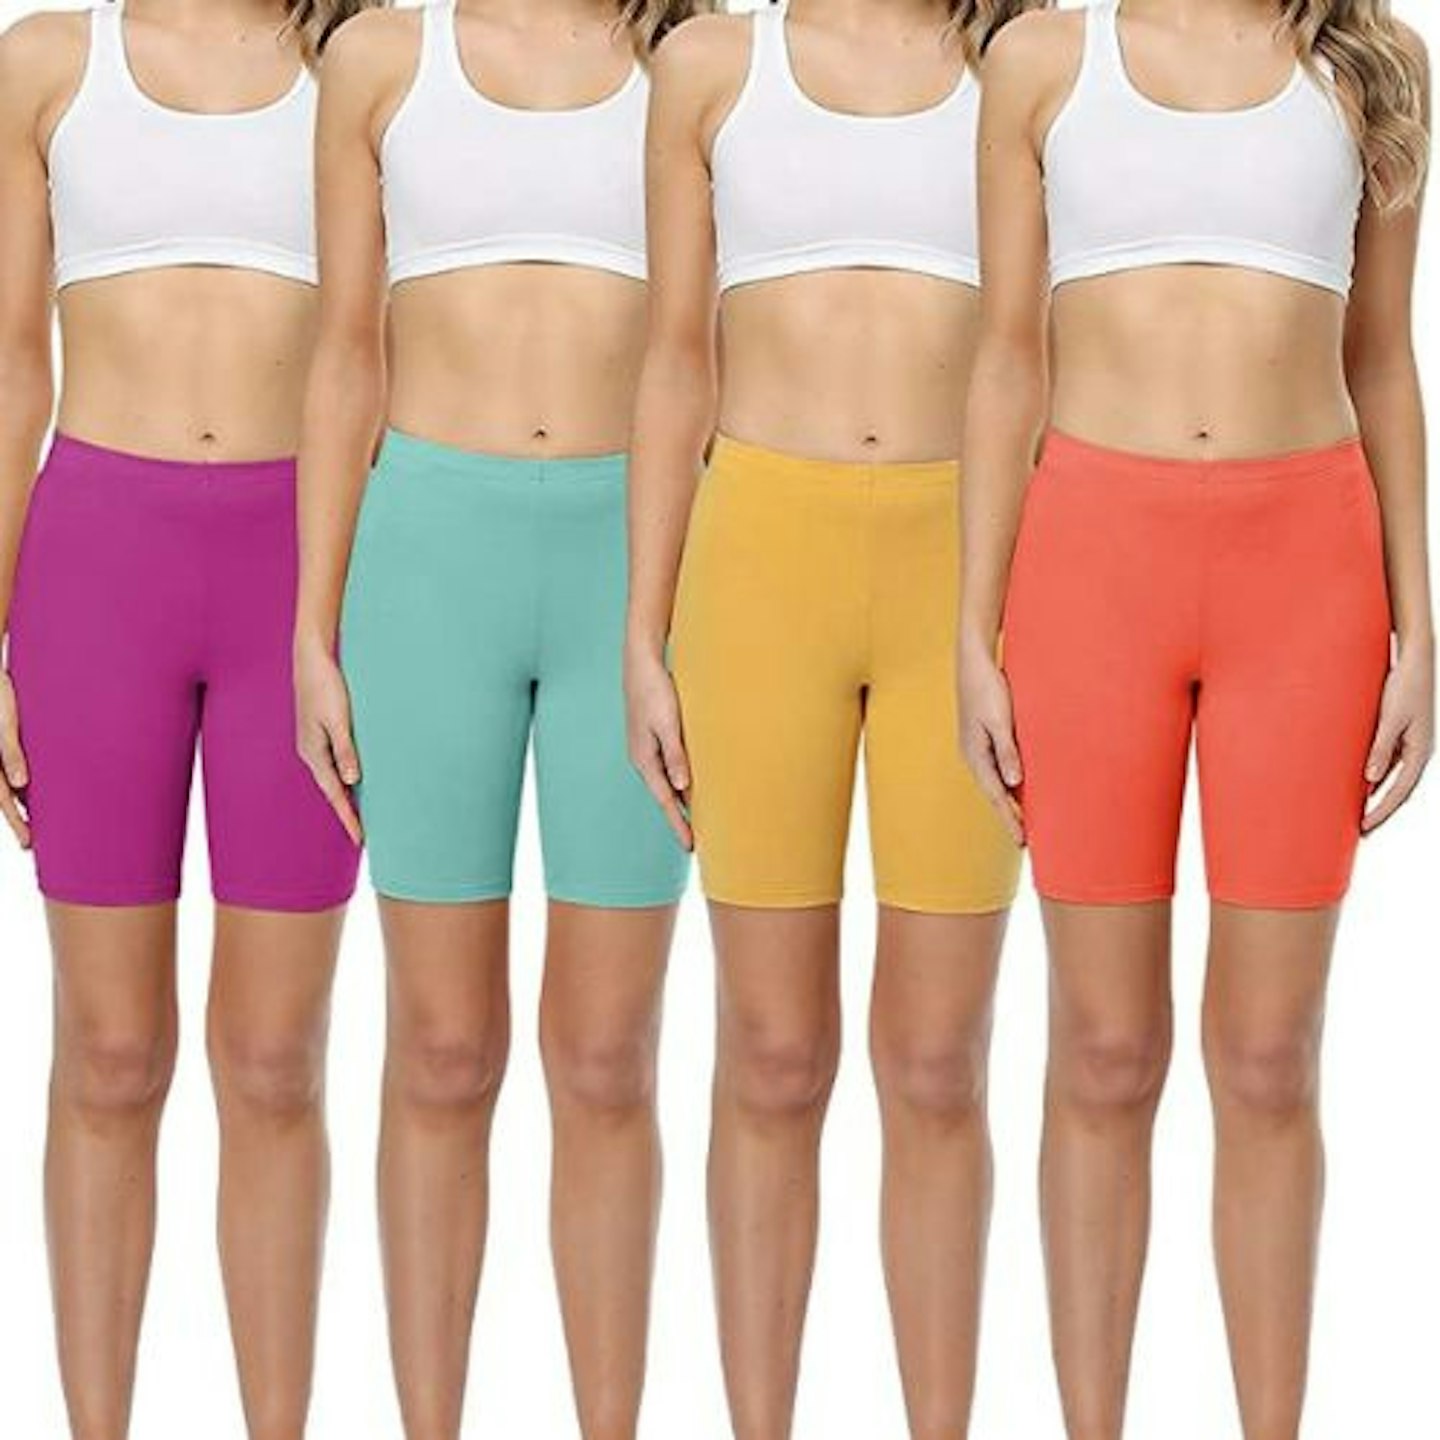 https://images.bauerhosting.com/affiliates/sites/9/2022/07/wirarpa-anti-chafing-shorts-for-under-dresses.jpg?auto=format&w=1440&q=80